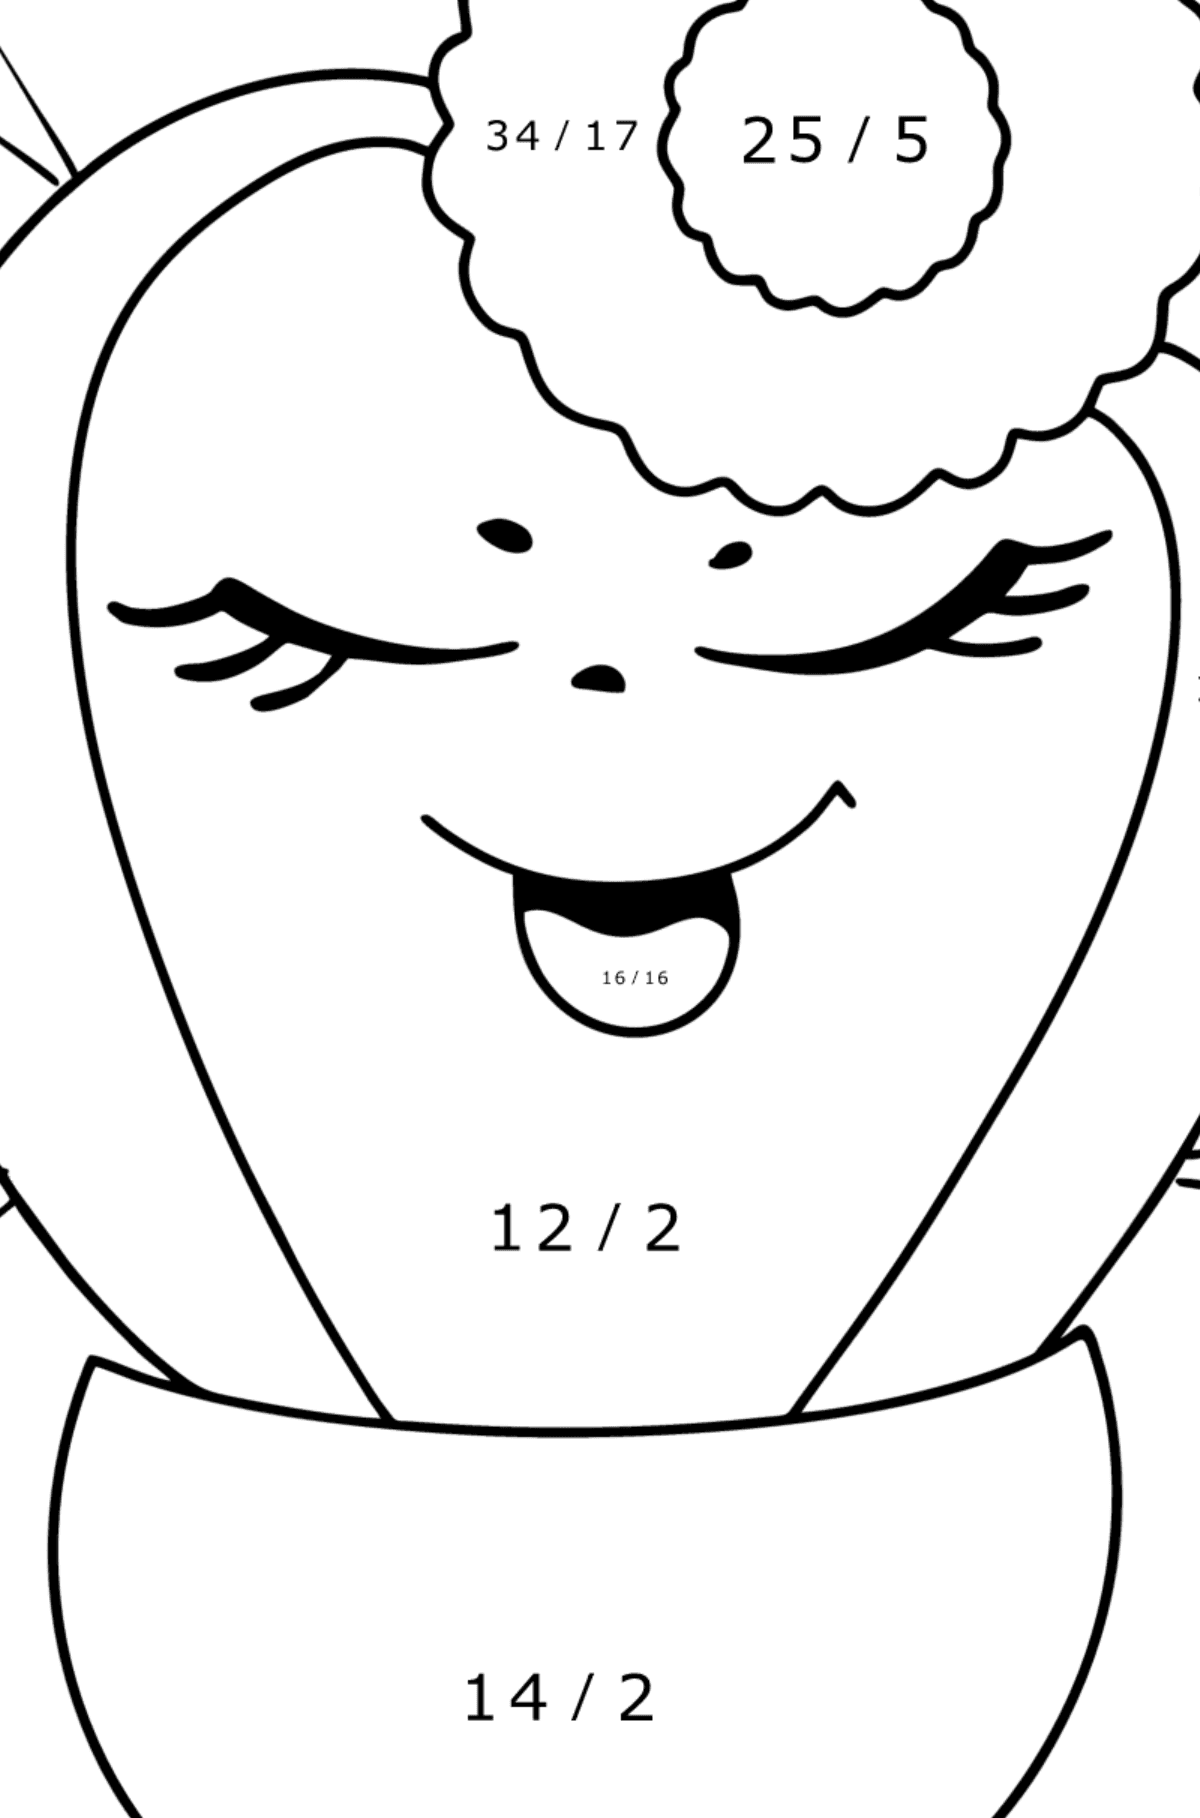 Cactus girl coloring page - Math Coloring - Division for Kids